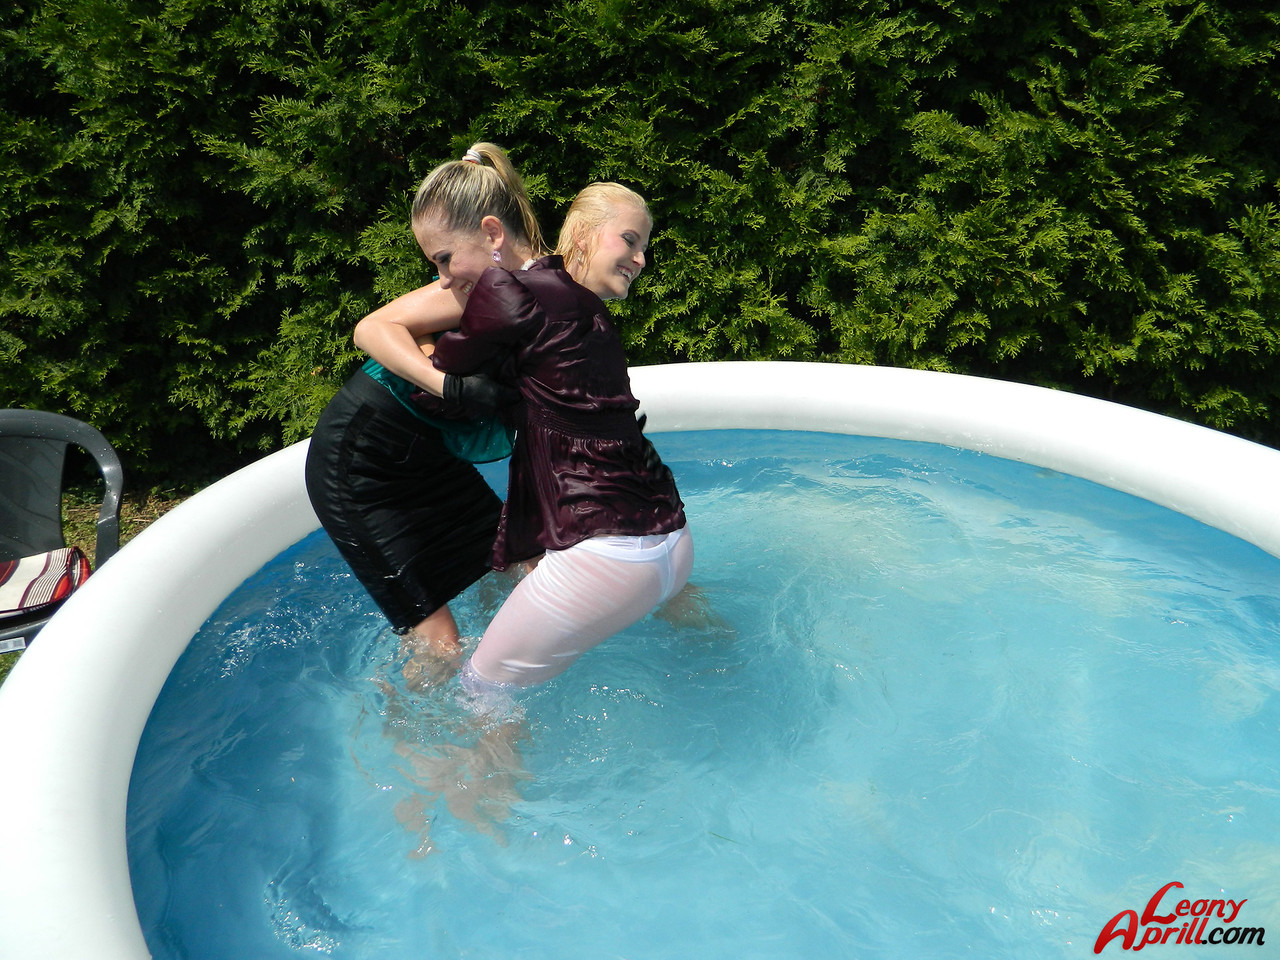 Clothed lesbians get soaking wet after getting into an above-ground pool foto porno #428457822 | Leony Aprill Pics, Lesbian, porno mobile